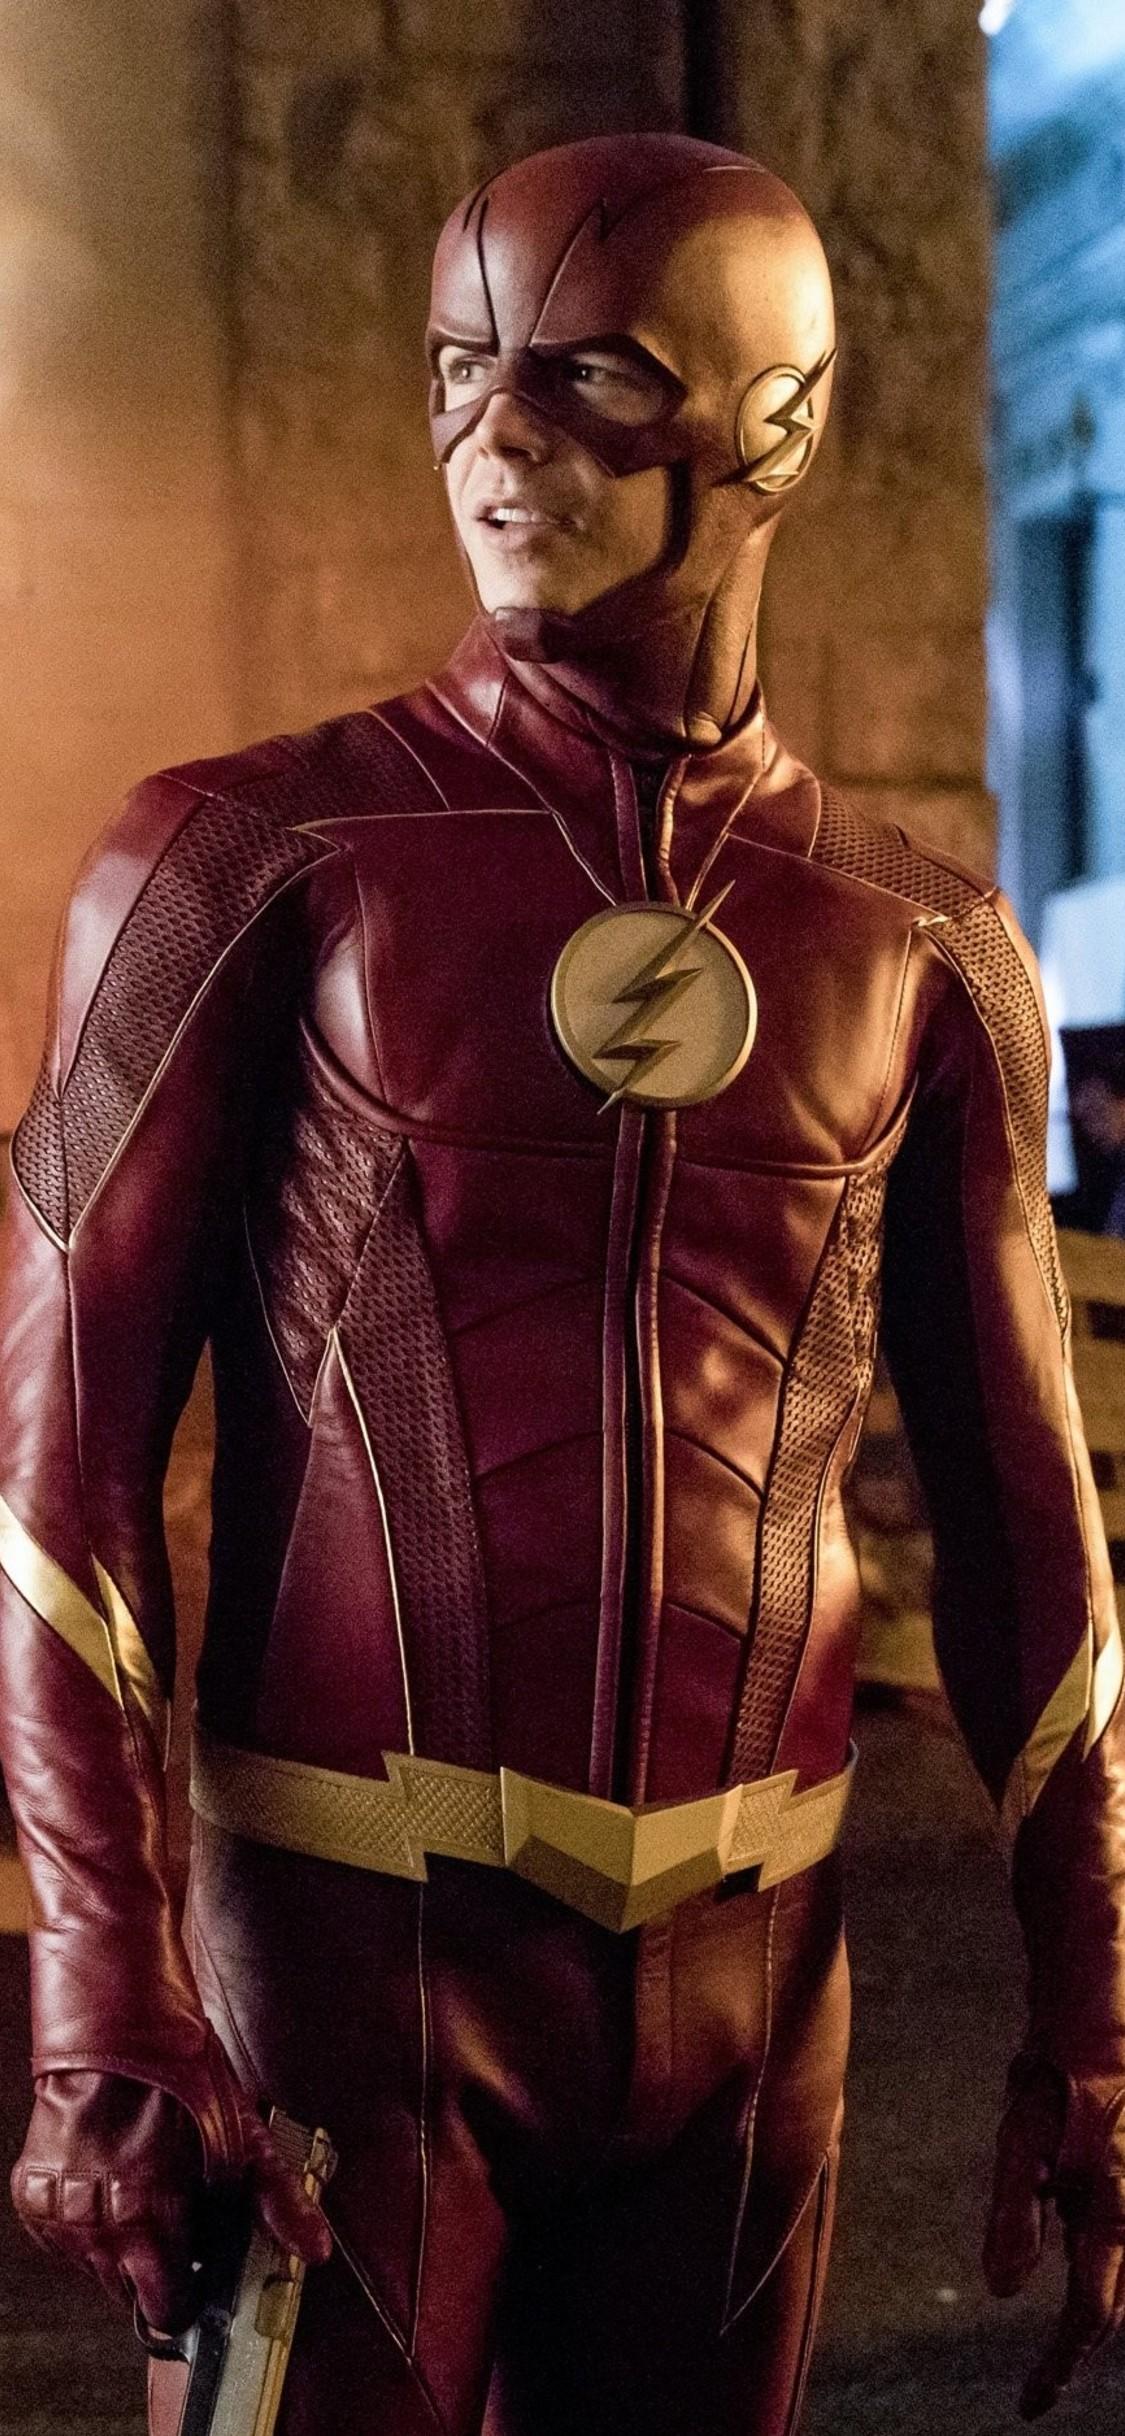 Barry Allen As Flash In The Flash Season 4 2017 iPhone XS